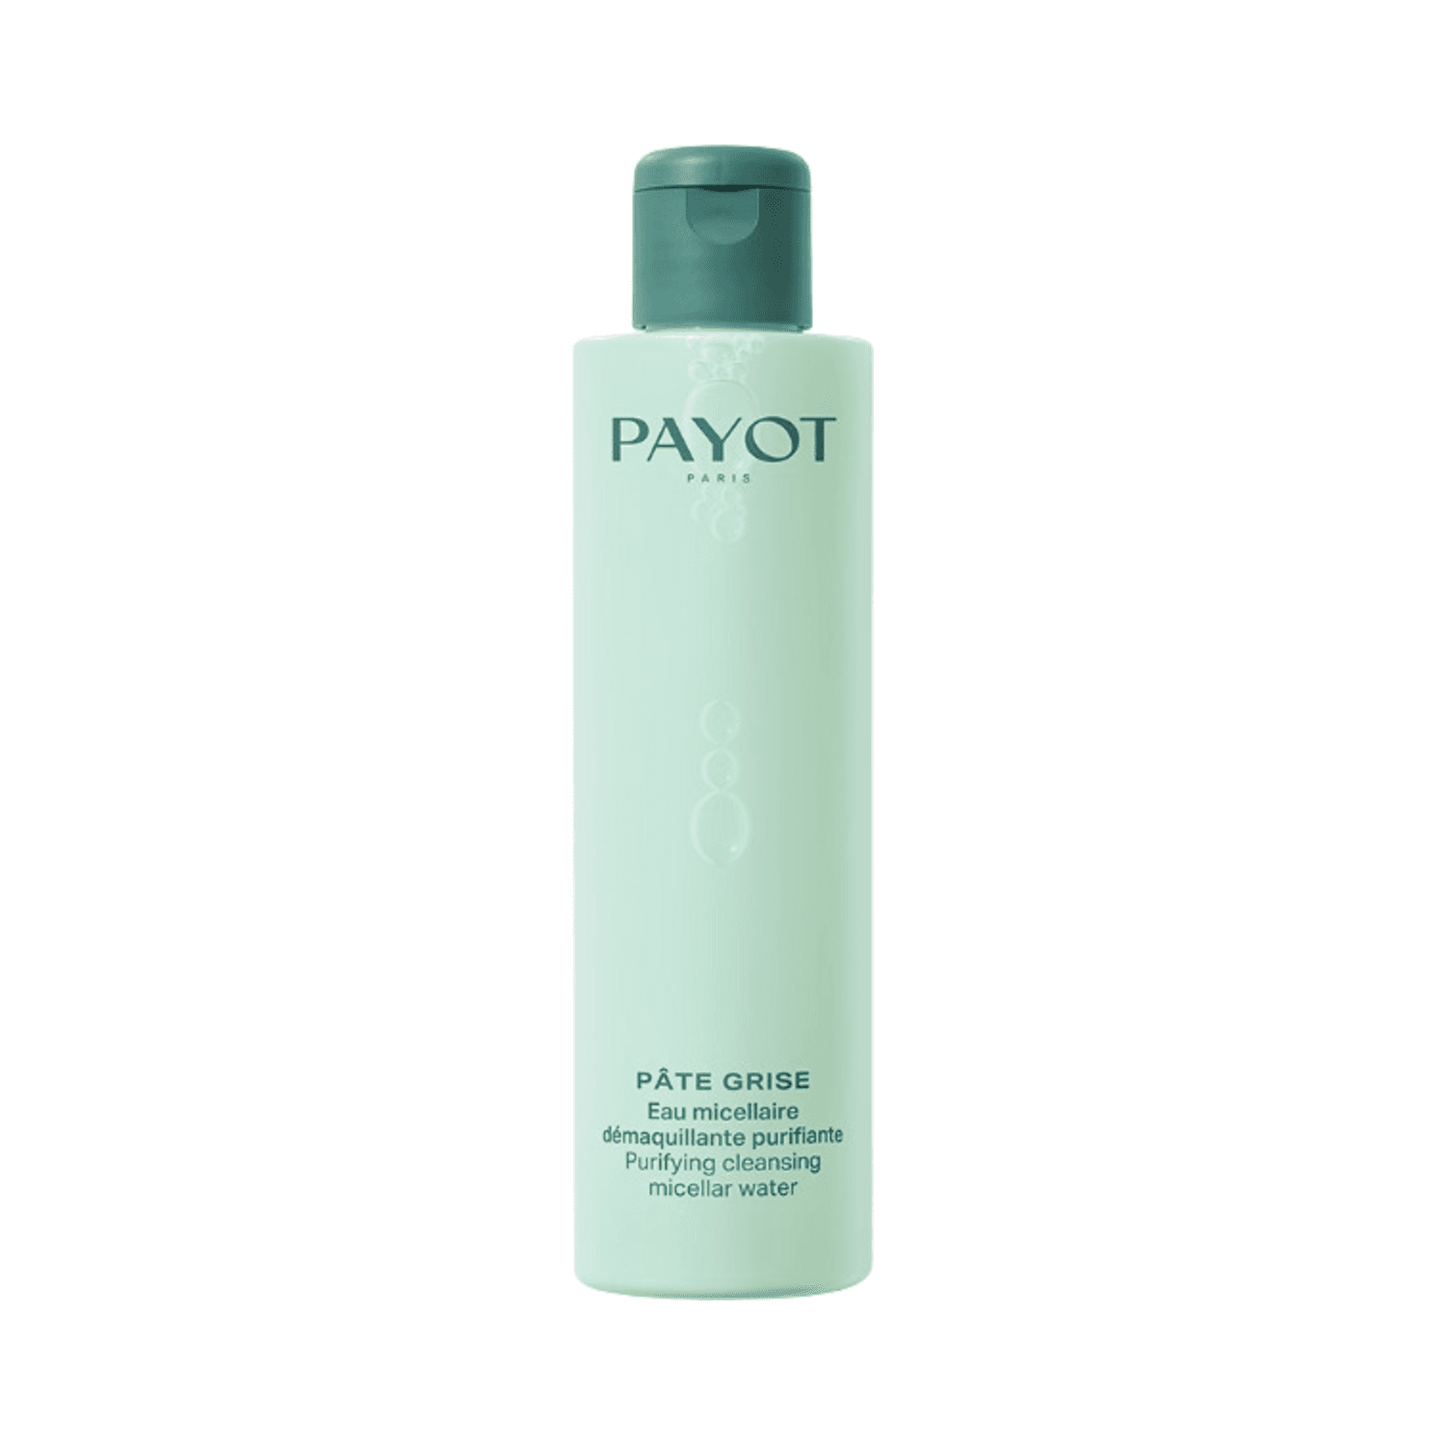 Payot Purifying Cleansing Micellar Water